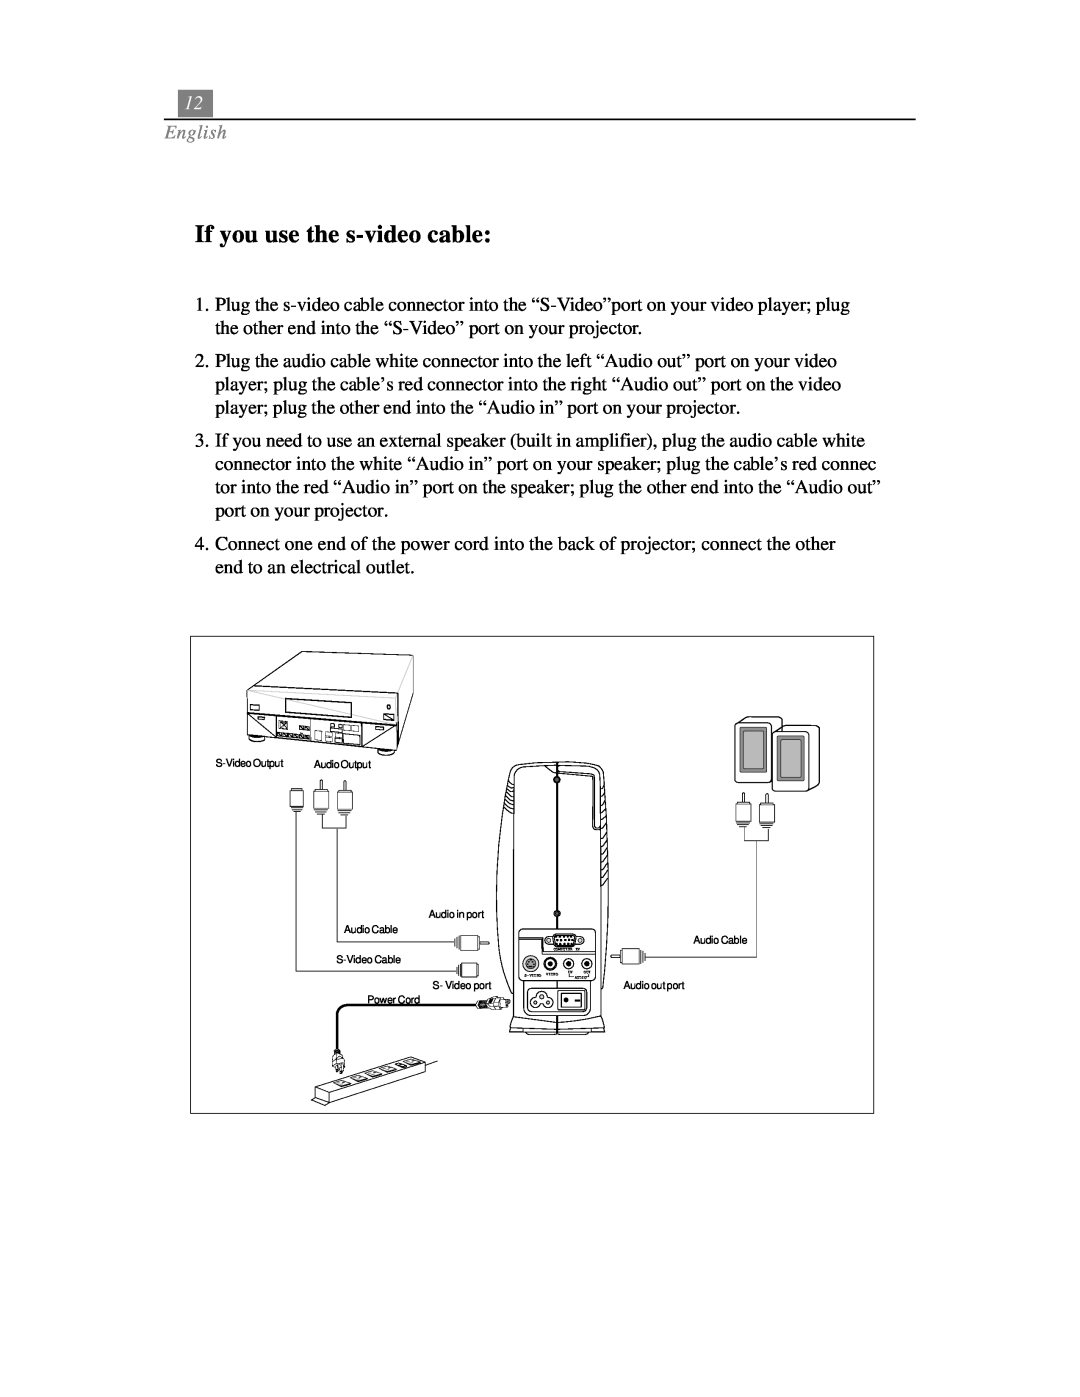 Optoma Technology EP718 specifications If you use the s-video cable, English 